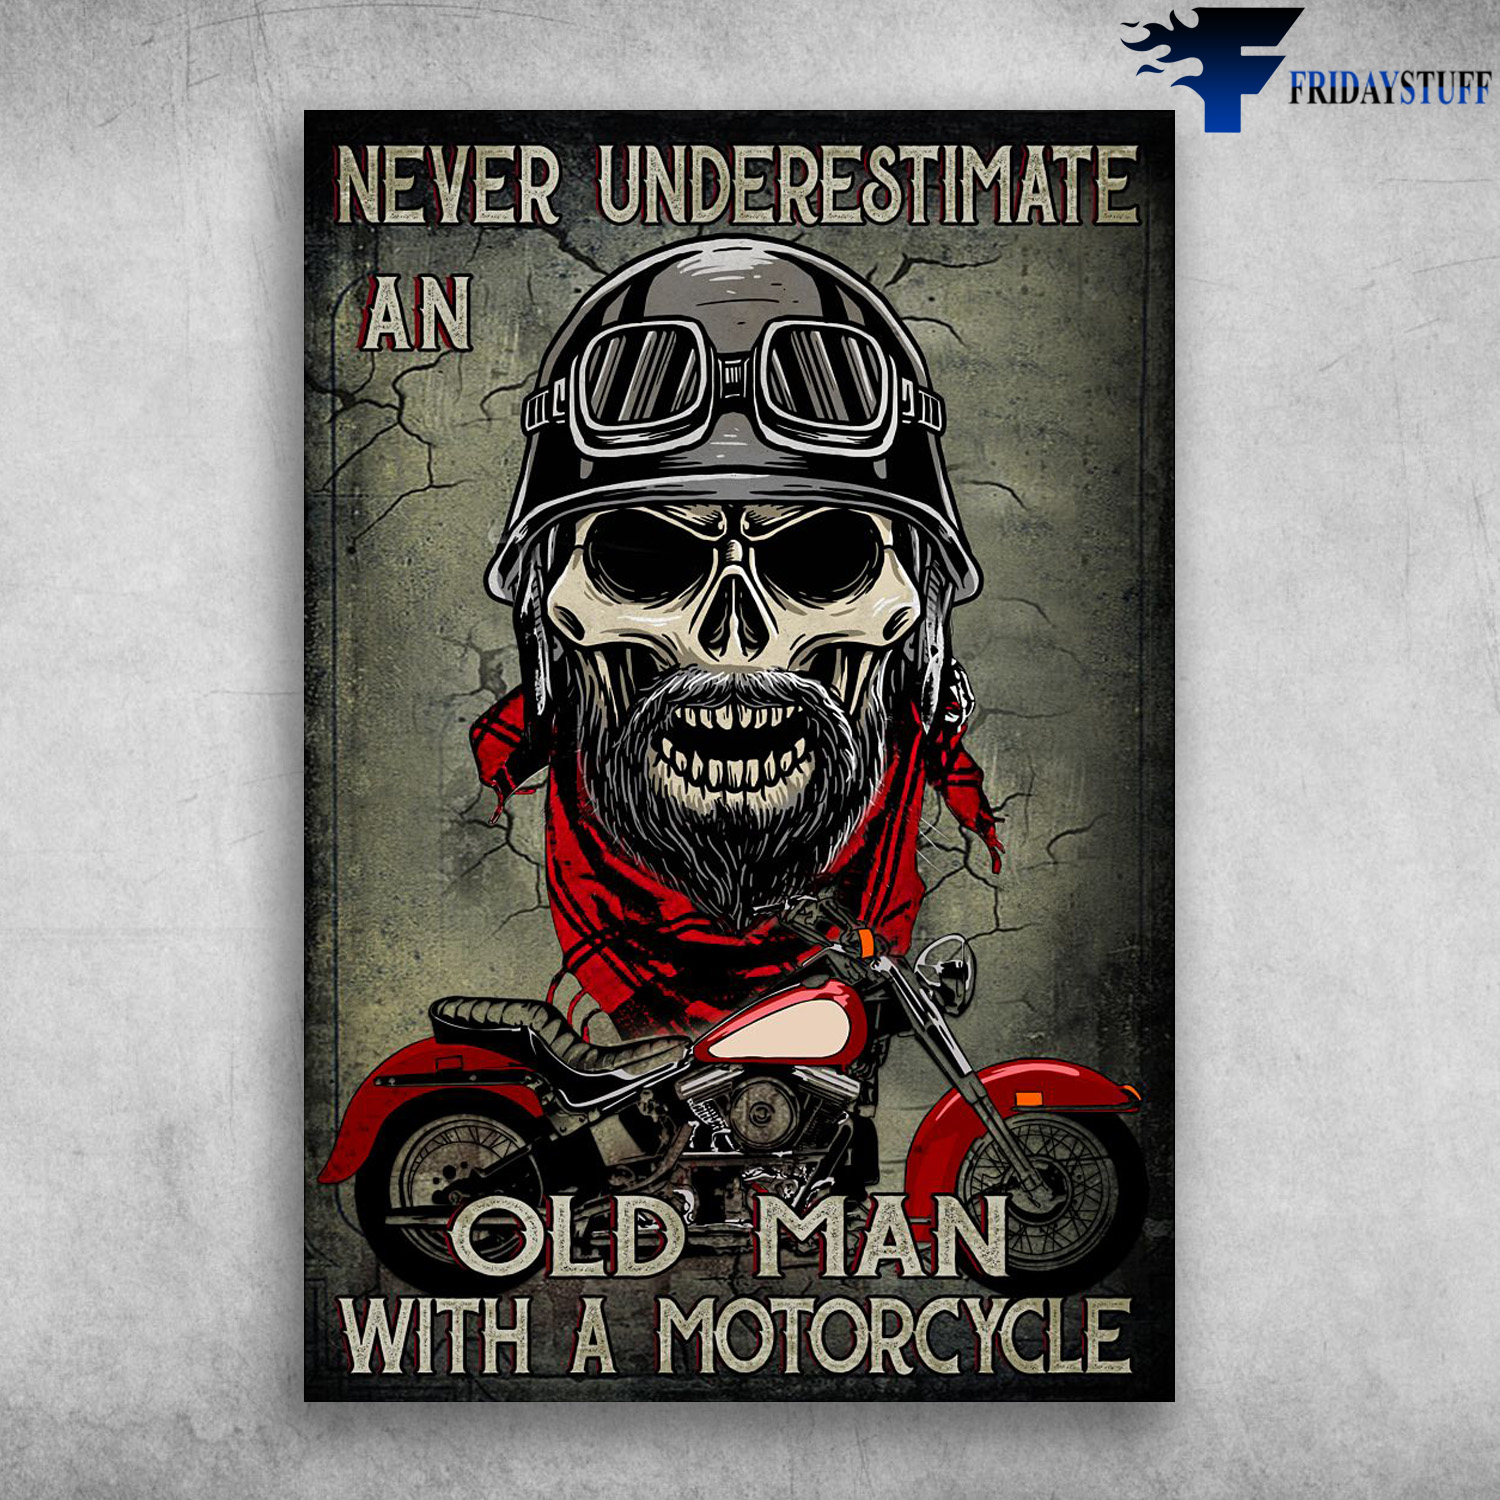 Old Skull Motorbike - Never Underestimate An Old Man With A Motorcycle